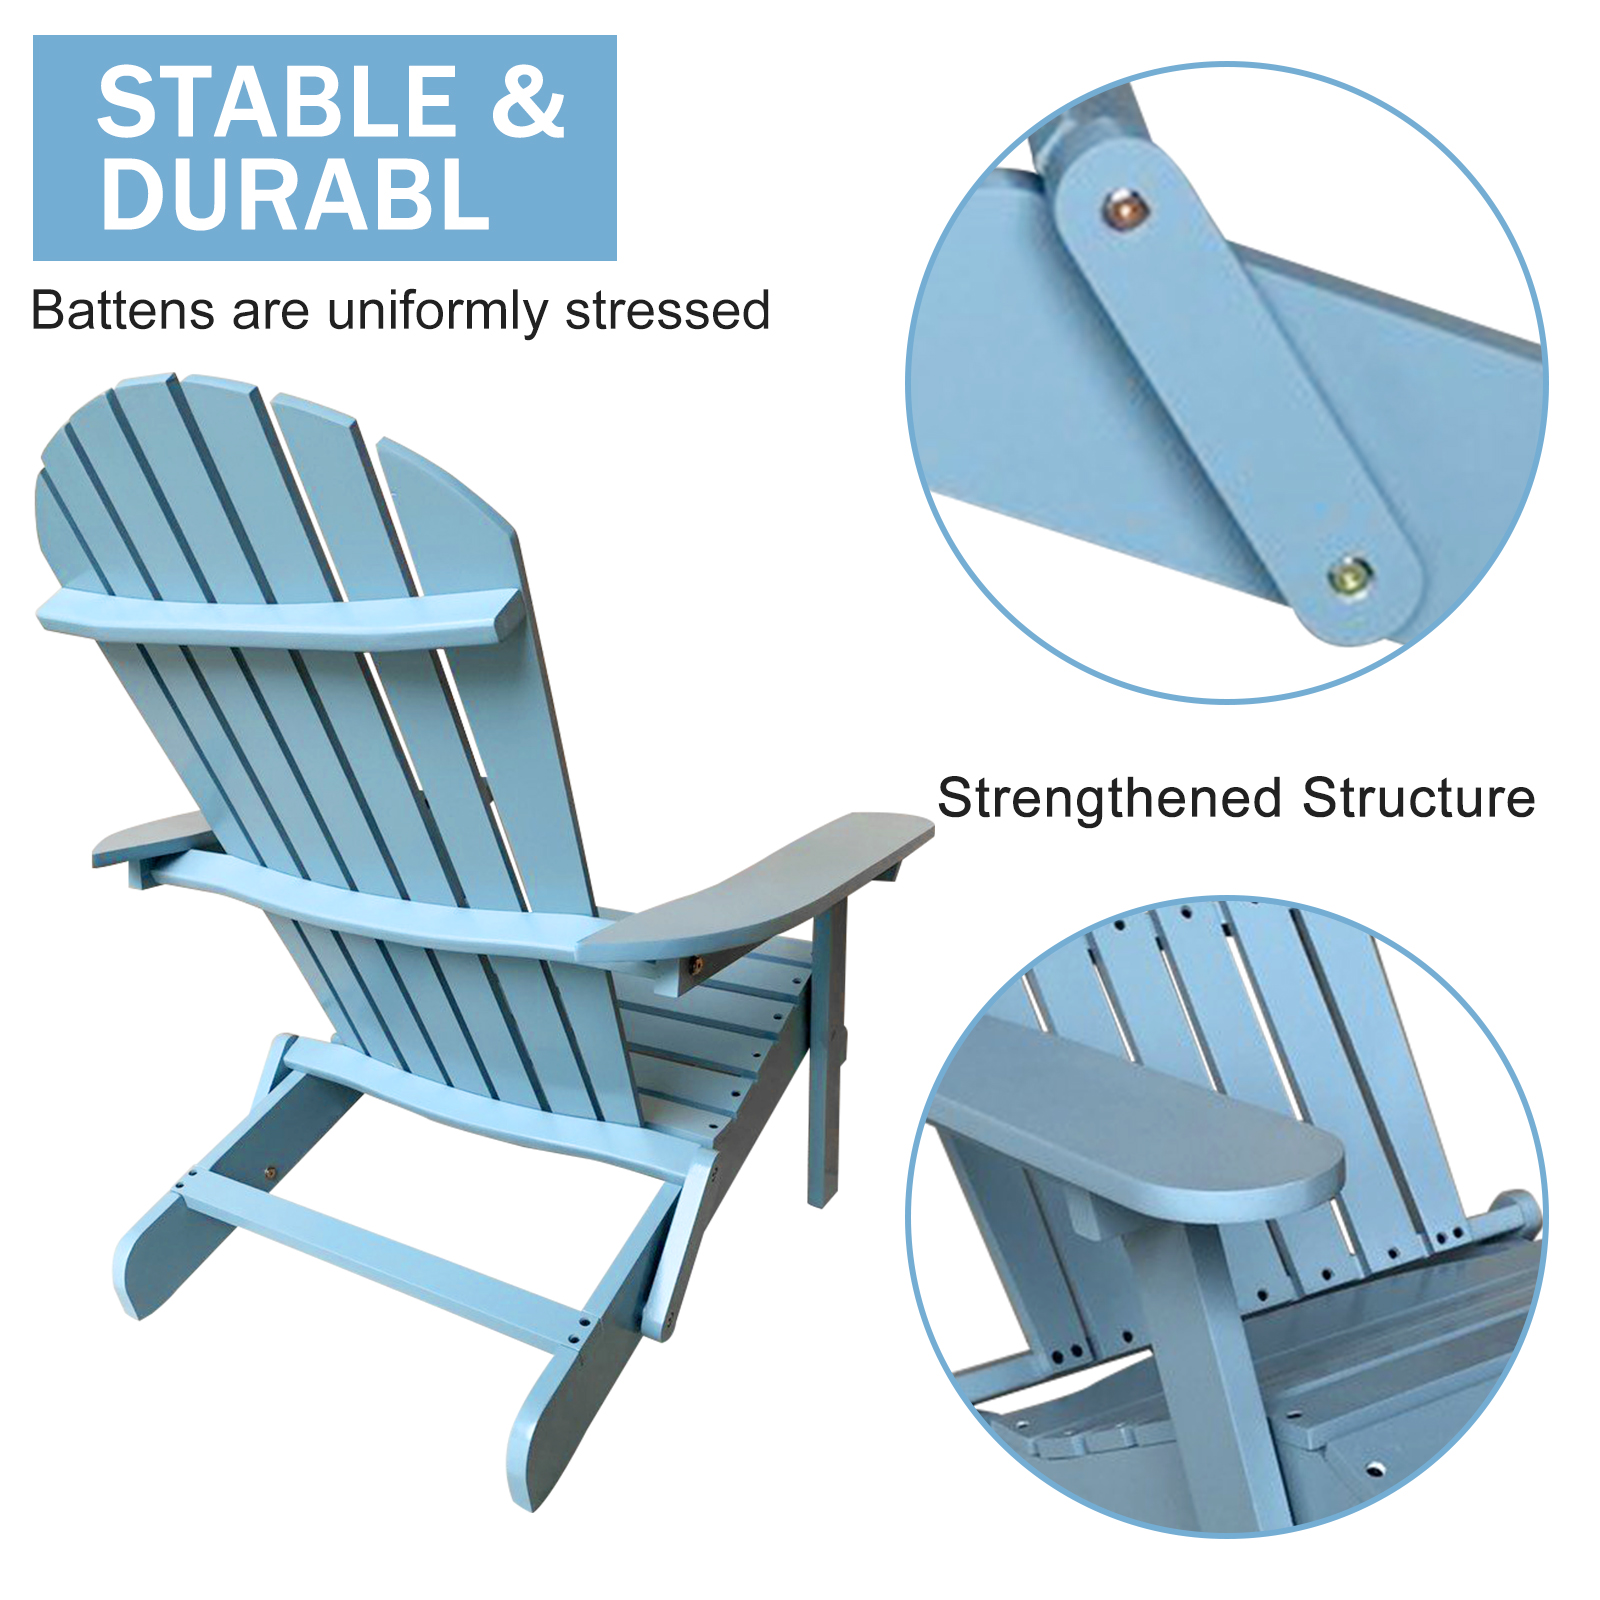 Adirondack Chair Outdoor Folding Wooden Adirondack Lounger Chair Patio Chair Lawn Chair for Adults, Turquoise, Blue - image 3 of 7